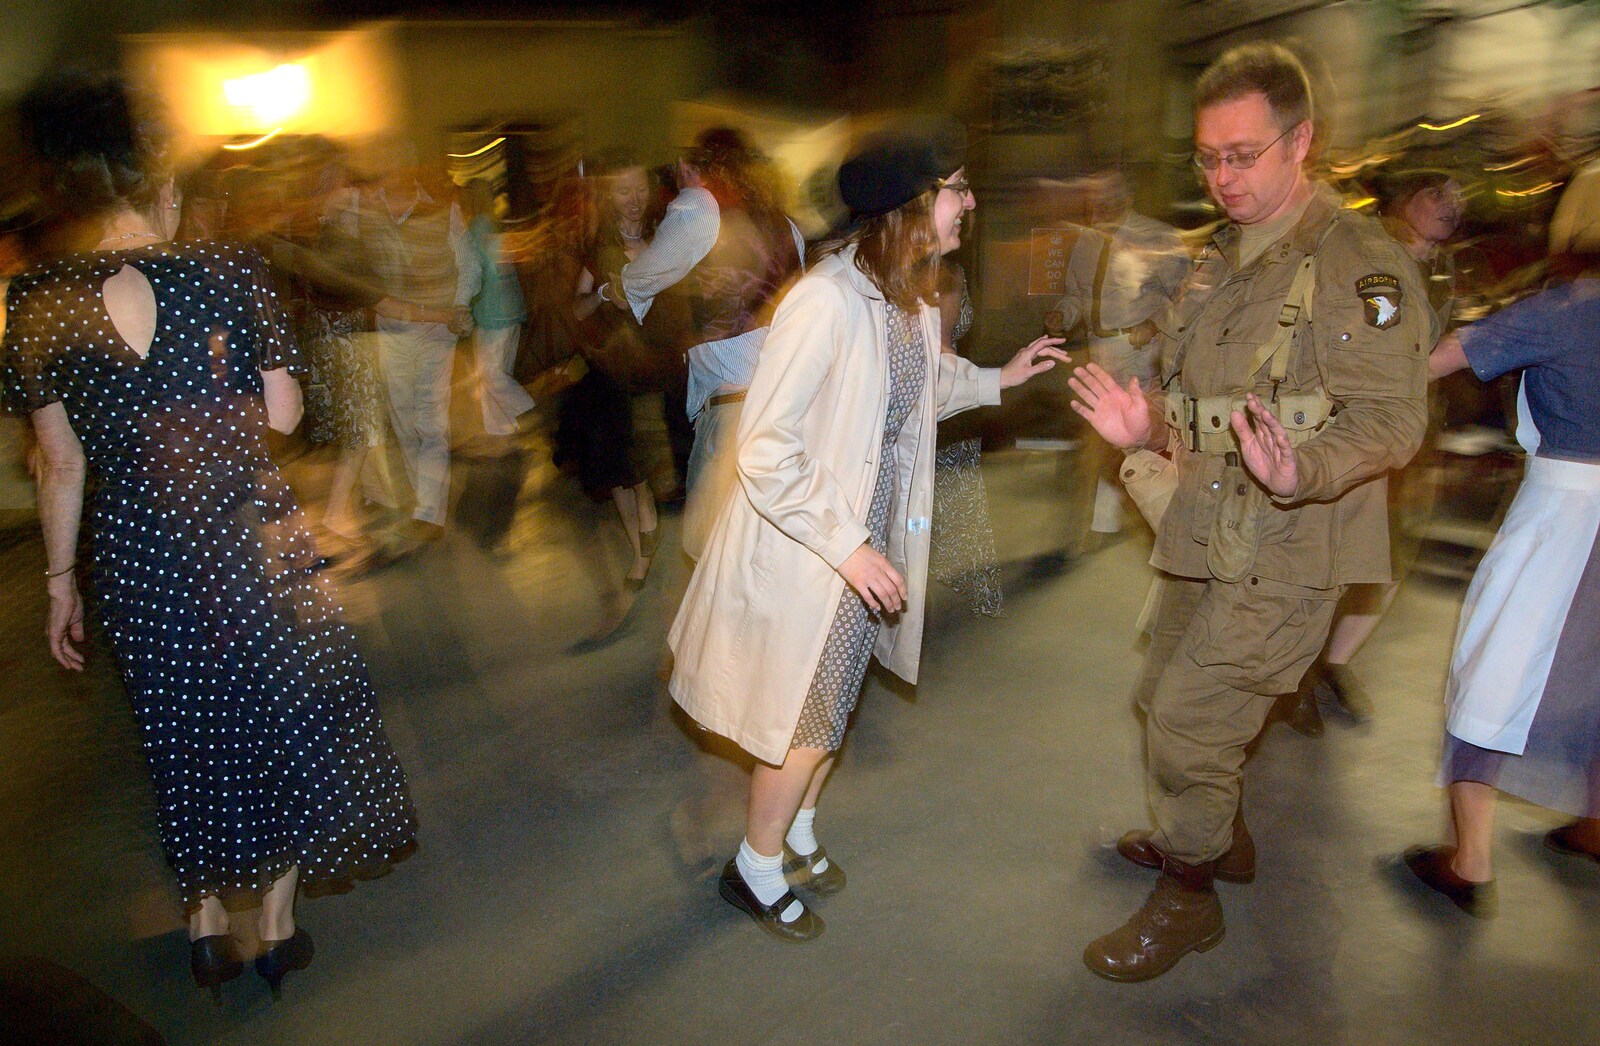 The Bressingham Blitz 1940s Dance, Bressingham Steam Museum, Norfolk - 21st May 2010: Sue 'I shall say zees only once' and GI Marc